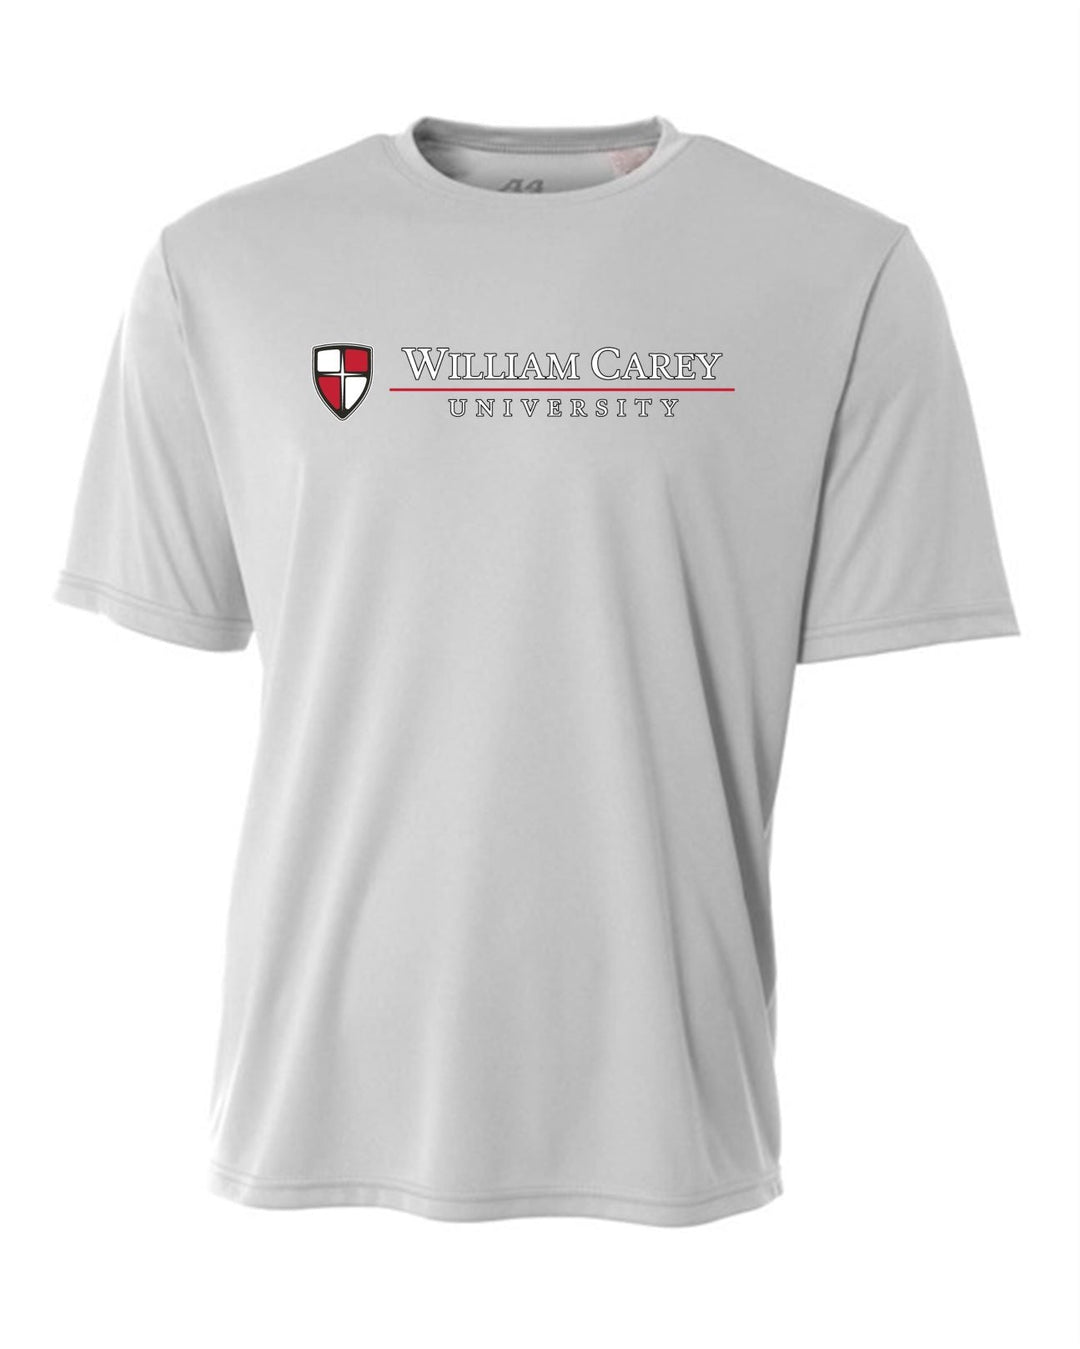 WCU Cooper School Of Missions & Ministry Youth Short-Sleeve Performance Shirt WCU CSMM Silver Grey Youth Small - Third Coast Soccer